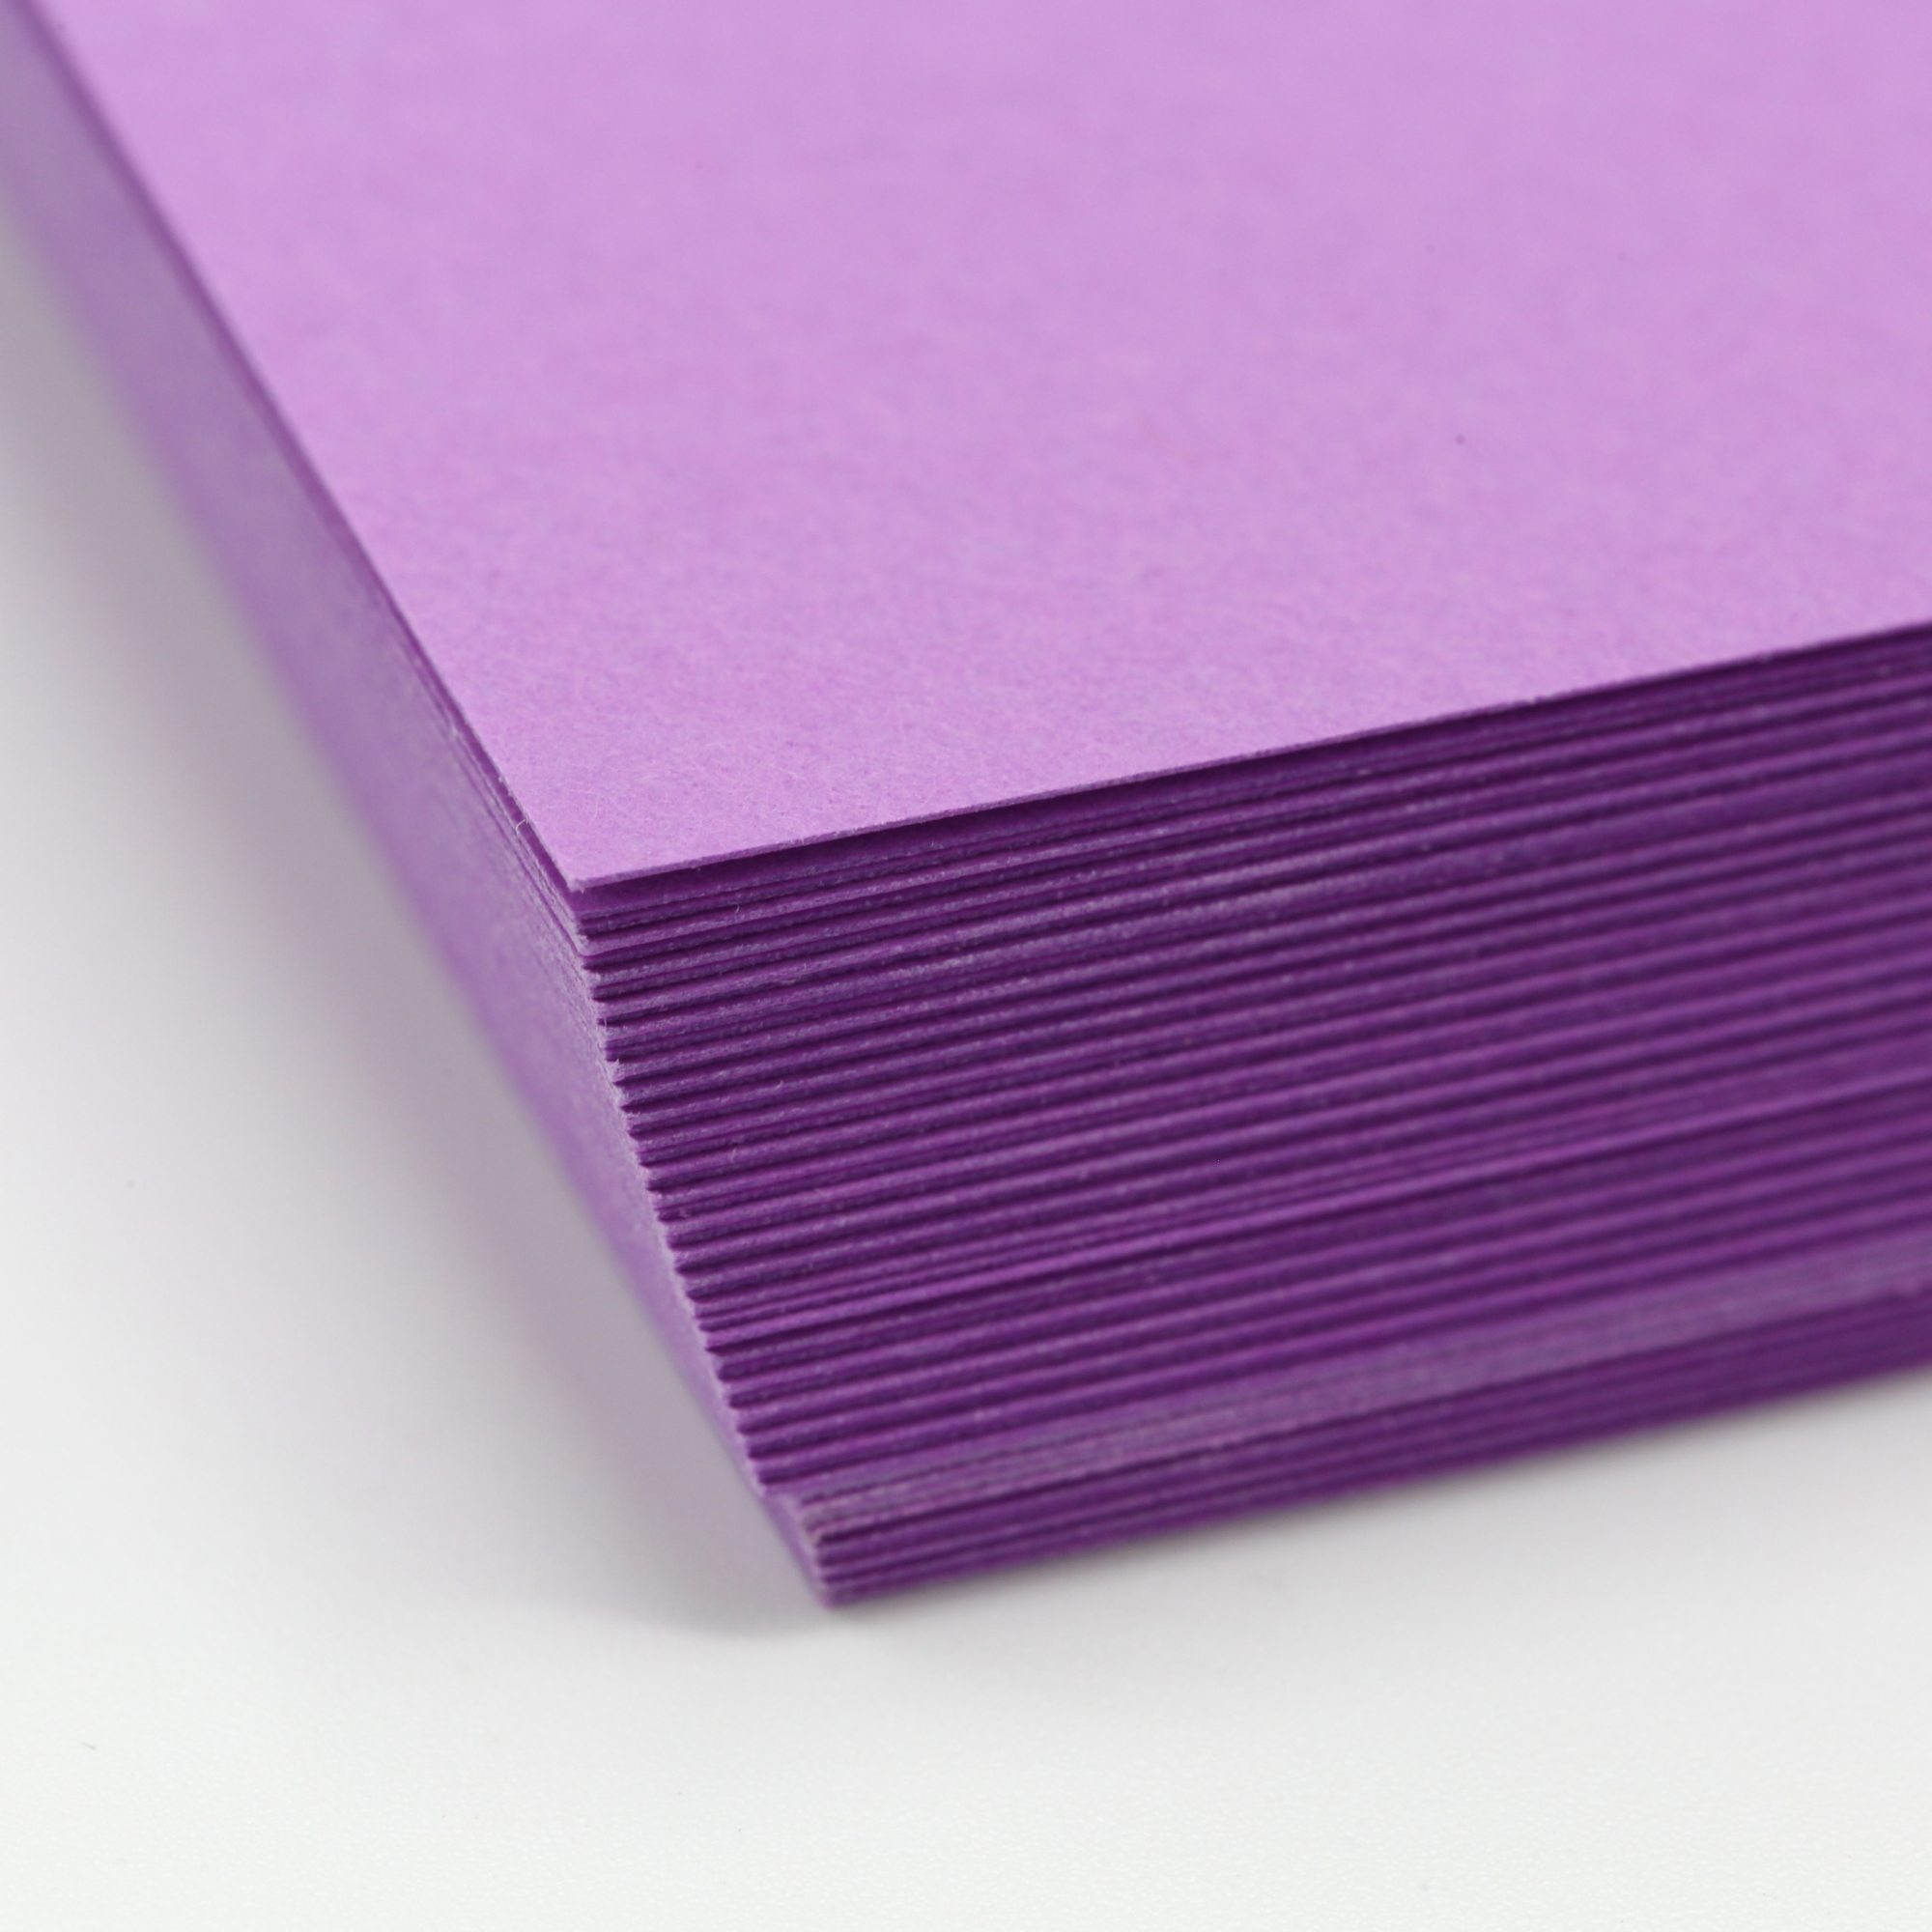 Astrobright Planetary Purple 11x17 24lb 500/pkg, Paper, Envelopes,  Cardstock & Wide format, Quick shipping nationwide